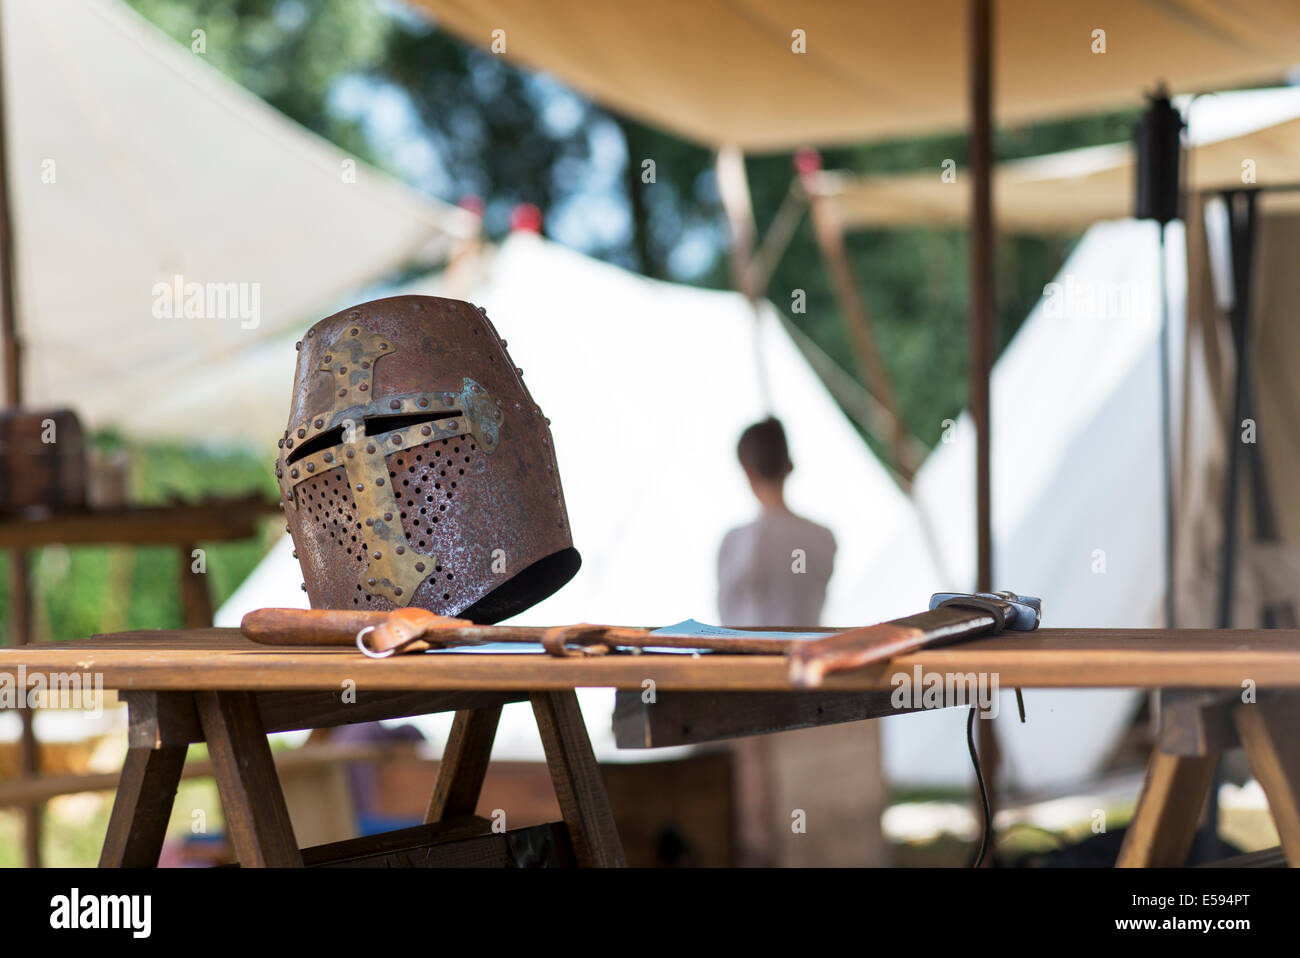 Medieval knights helmet and sword at the Tewkesbury medieval festival, Gloucestershire, England Stock Photo